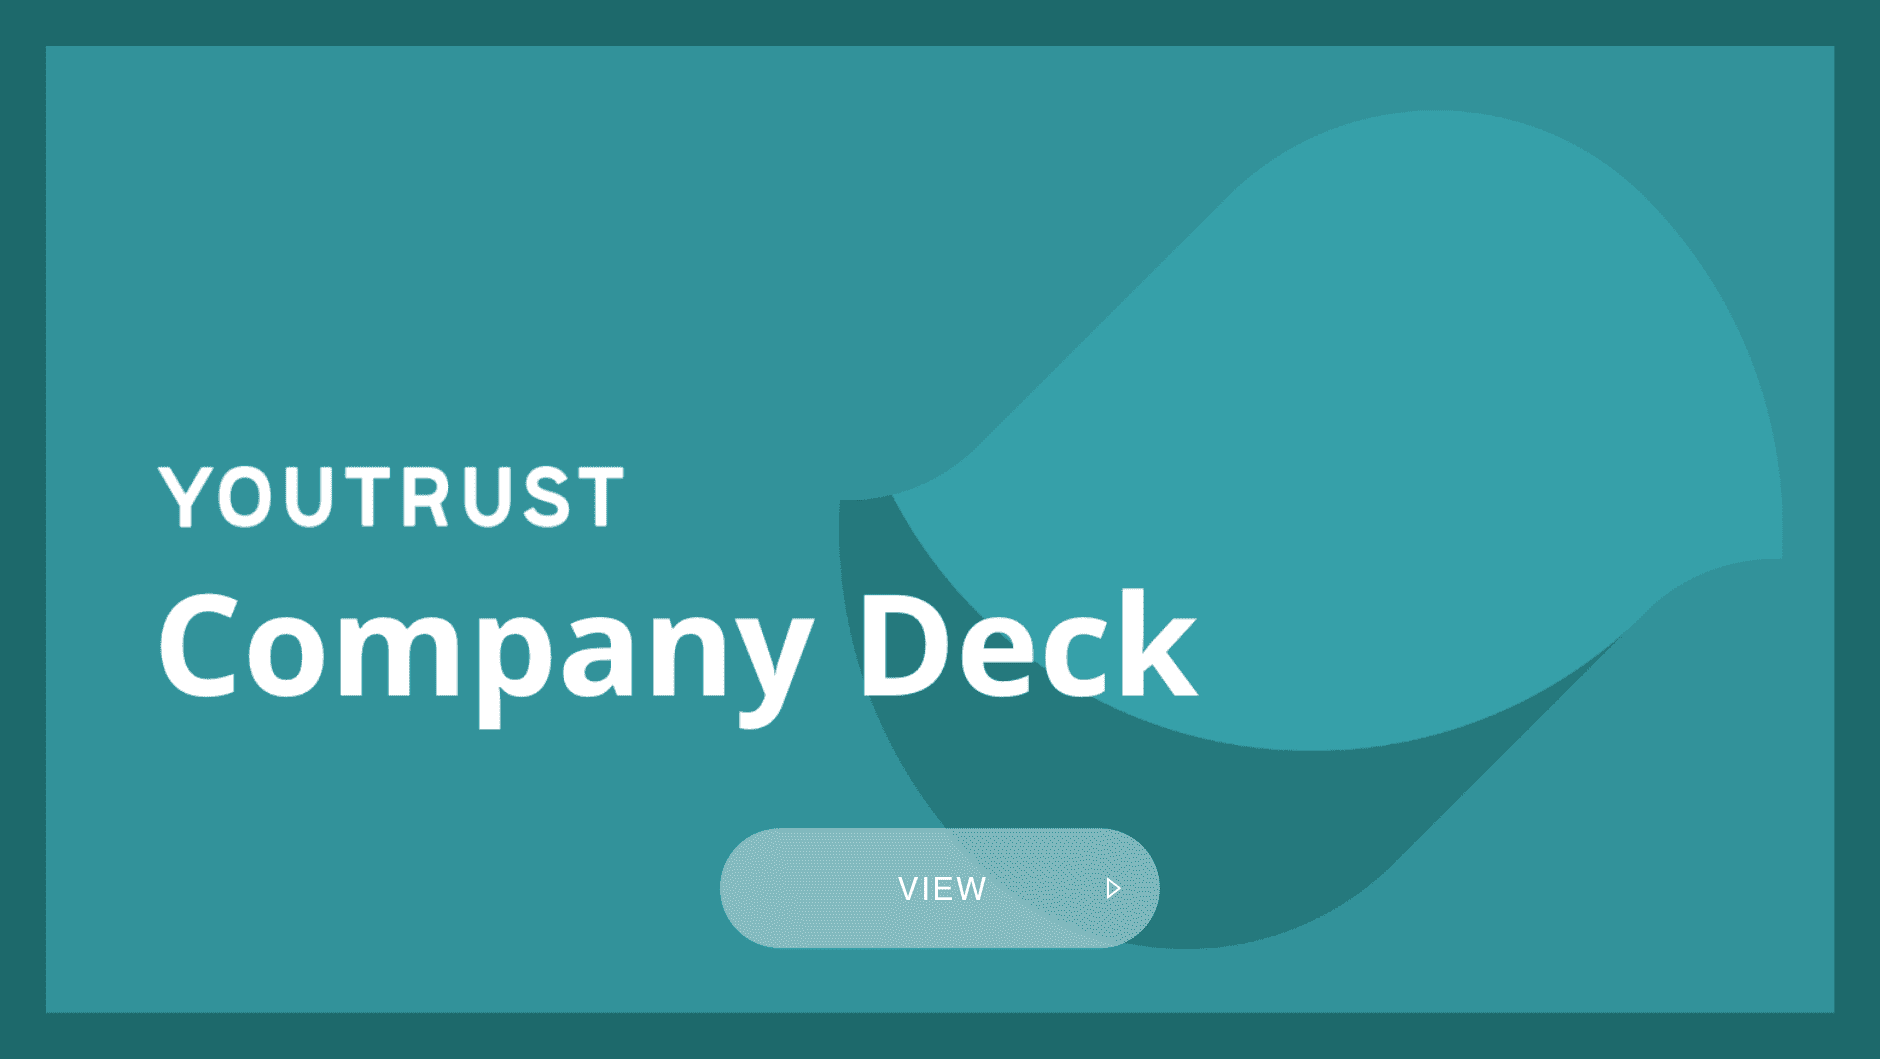 YOUTRUST Company Deck